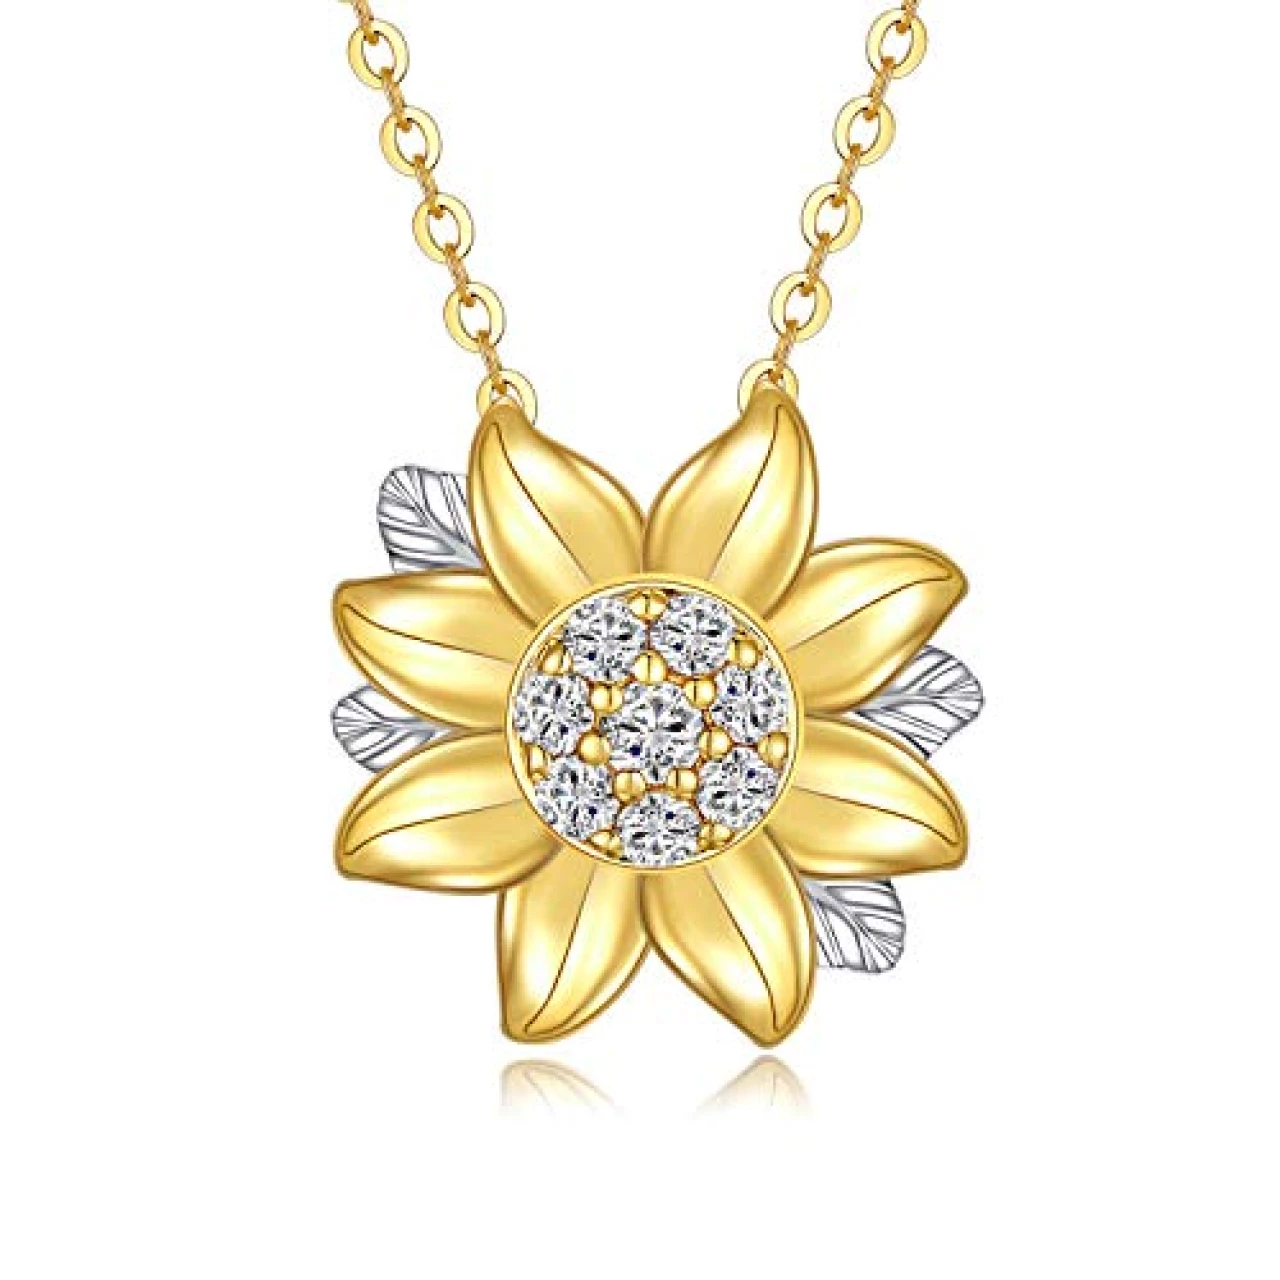 SISGEM 14K Real Gold Sunflower Necklace for Women, You Are My Sunshine Gold Moissanite Sunflower Pendant Anniversary Mother&rsquo;s Day Gift Jewelry for Her, Mom, Wife 16-18 inch